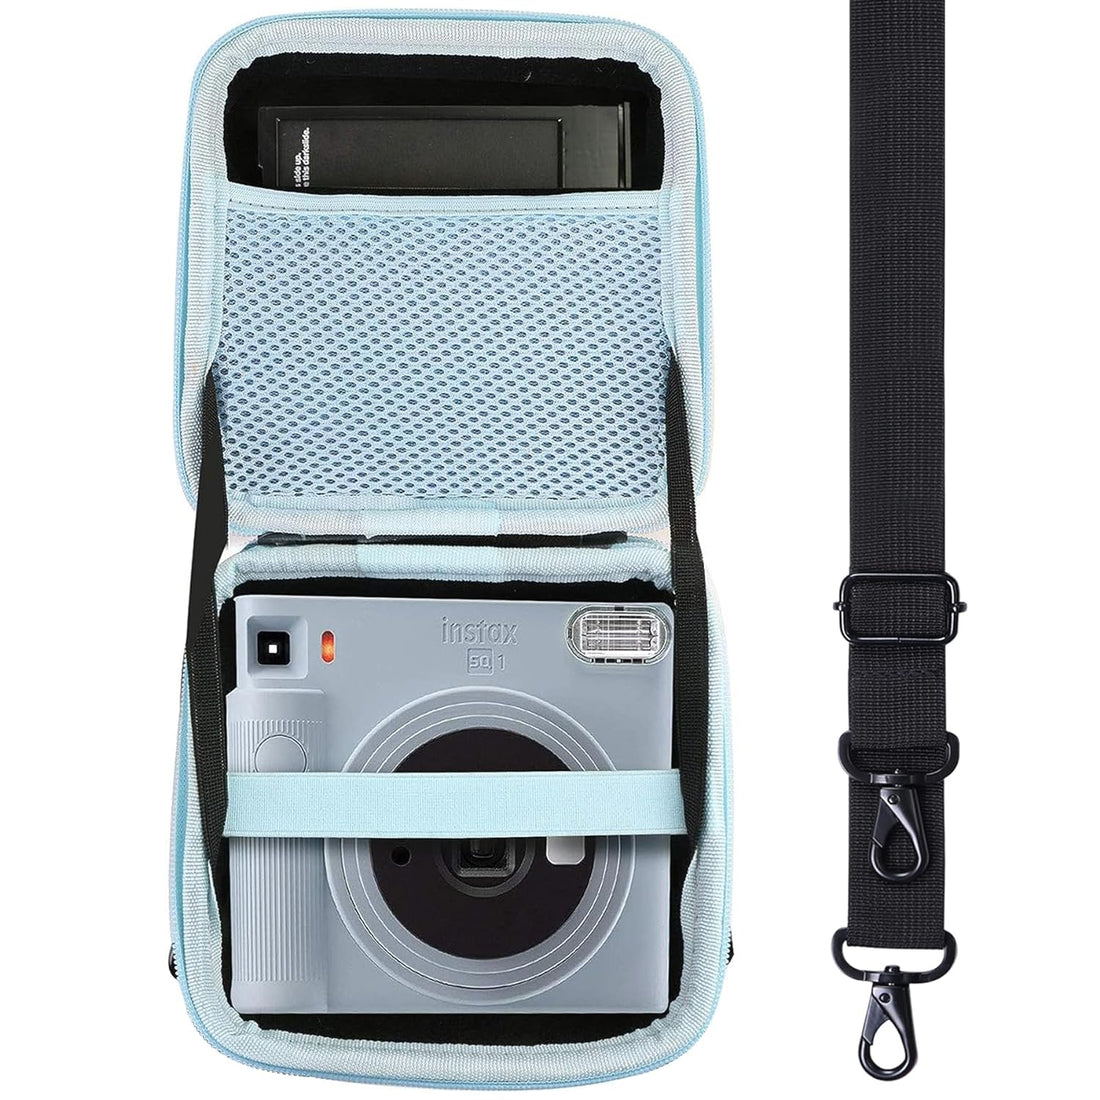 Aenllosi Hard Carrying Case Compatible with Fujifilm Instax Square SQ40/SQ1 Instant Camera,Mesh Pocket for Fujifilm Instax Square Film & Charging Cable(Inside Blue)